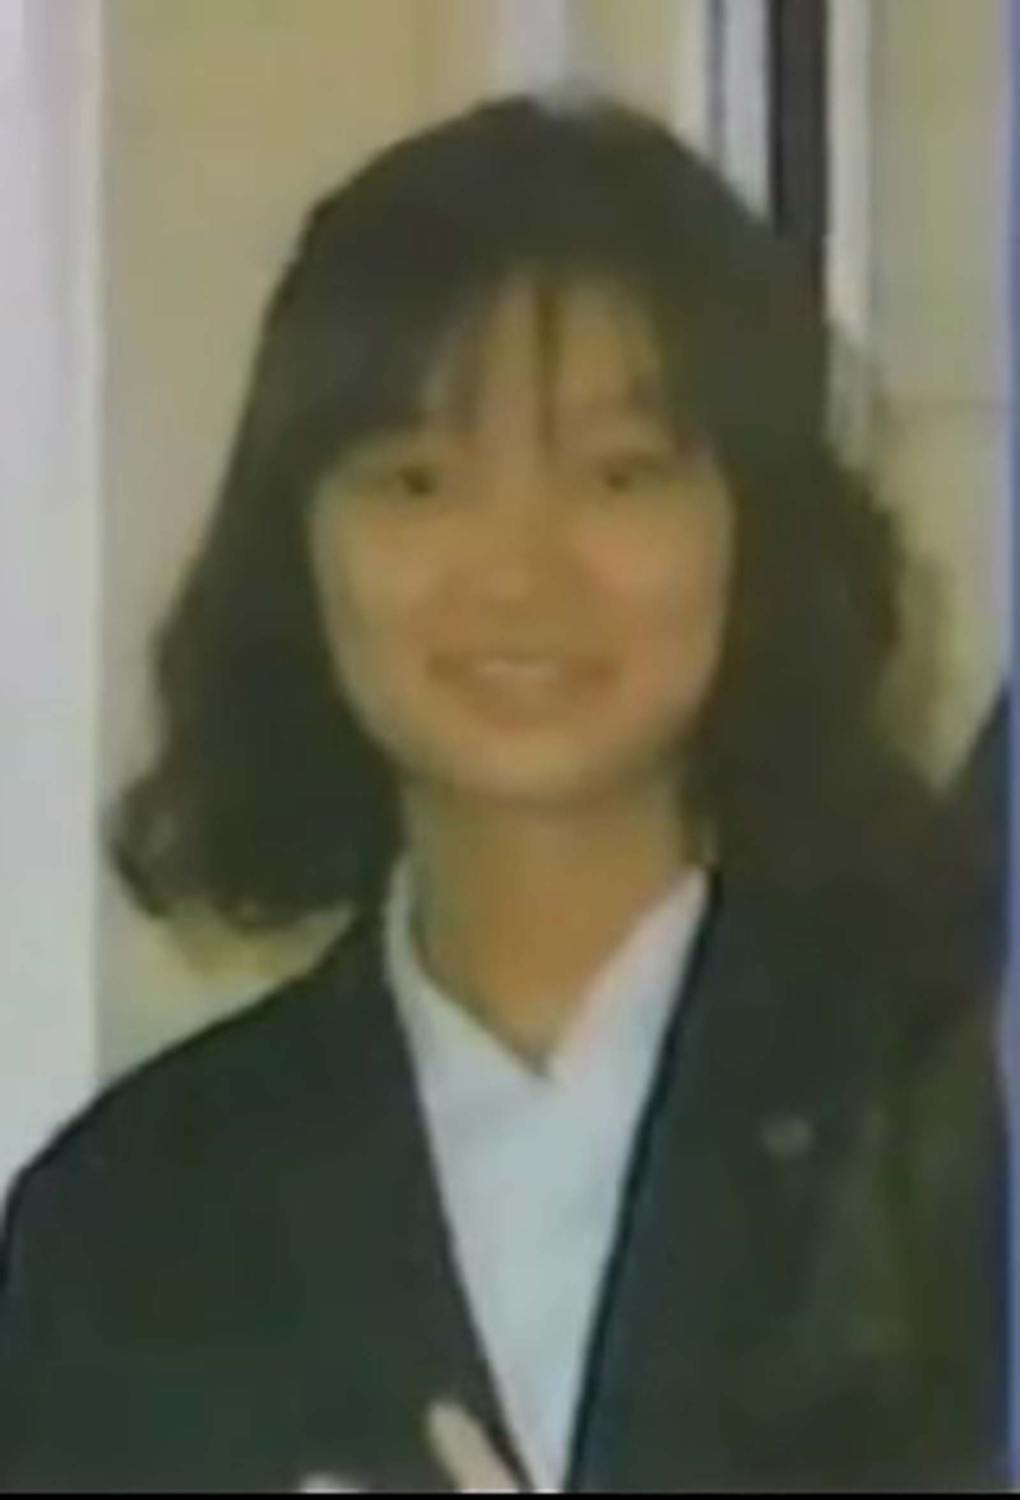 Junko Furuta: 44 Days Of Torture And One Of The Most Horrible Deaths In Crime History